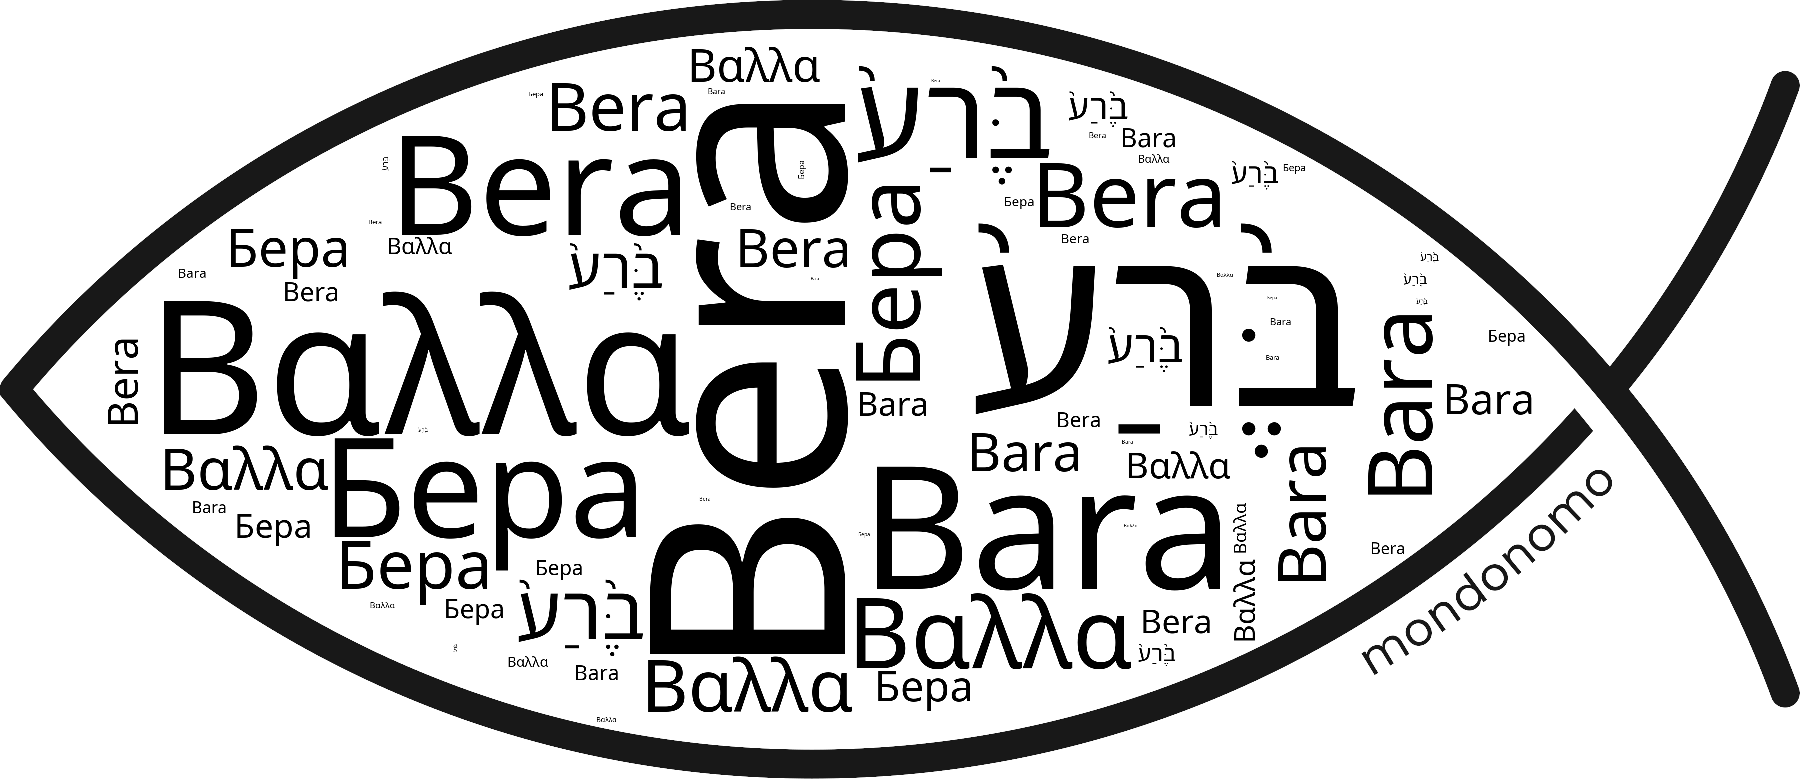 Name Bera in the world's Bibles